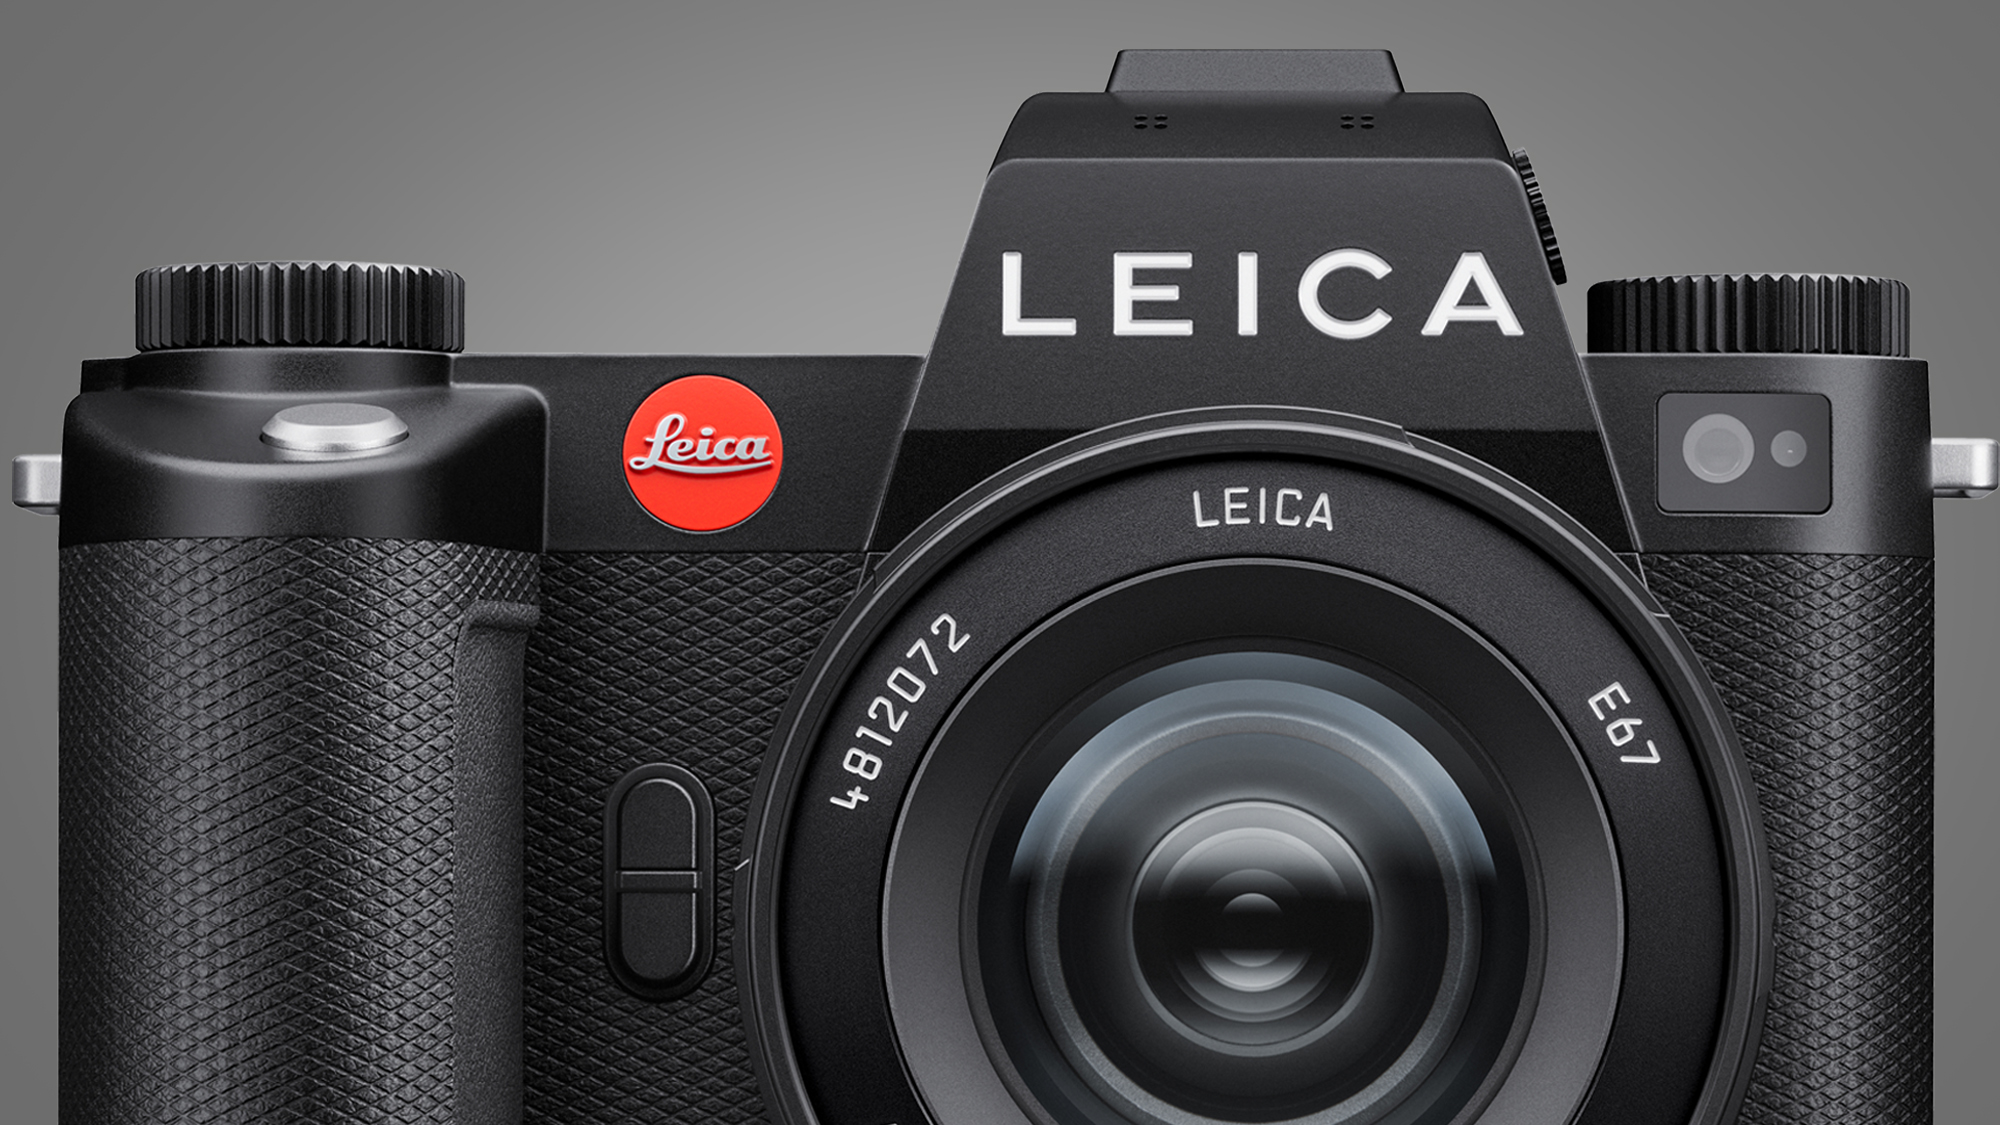 The Leica SL3 camera on a gray background